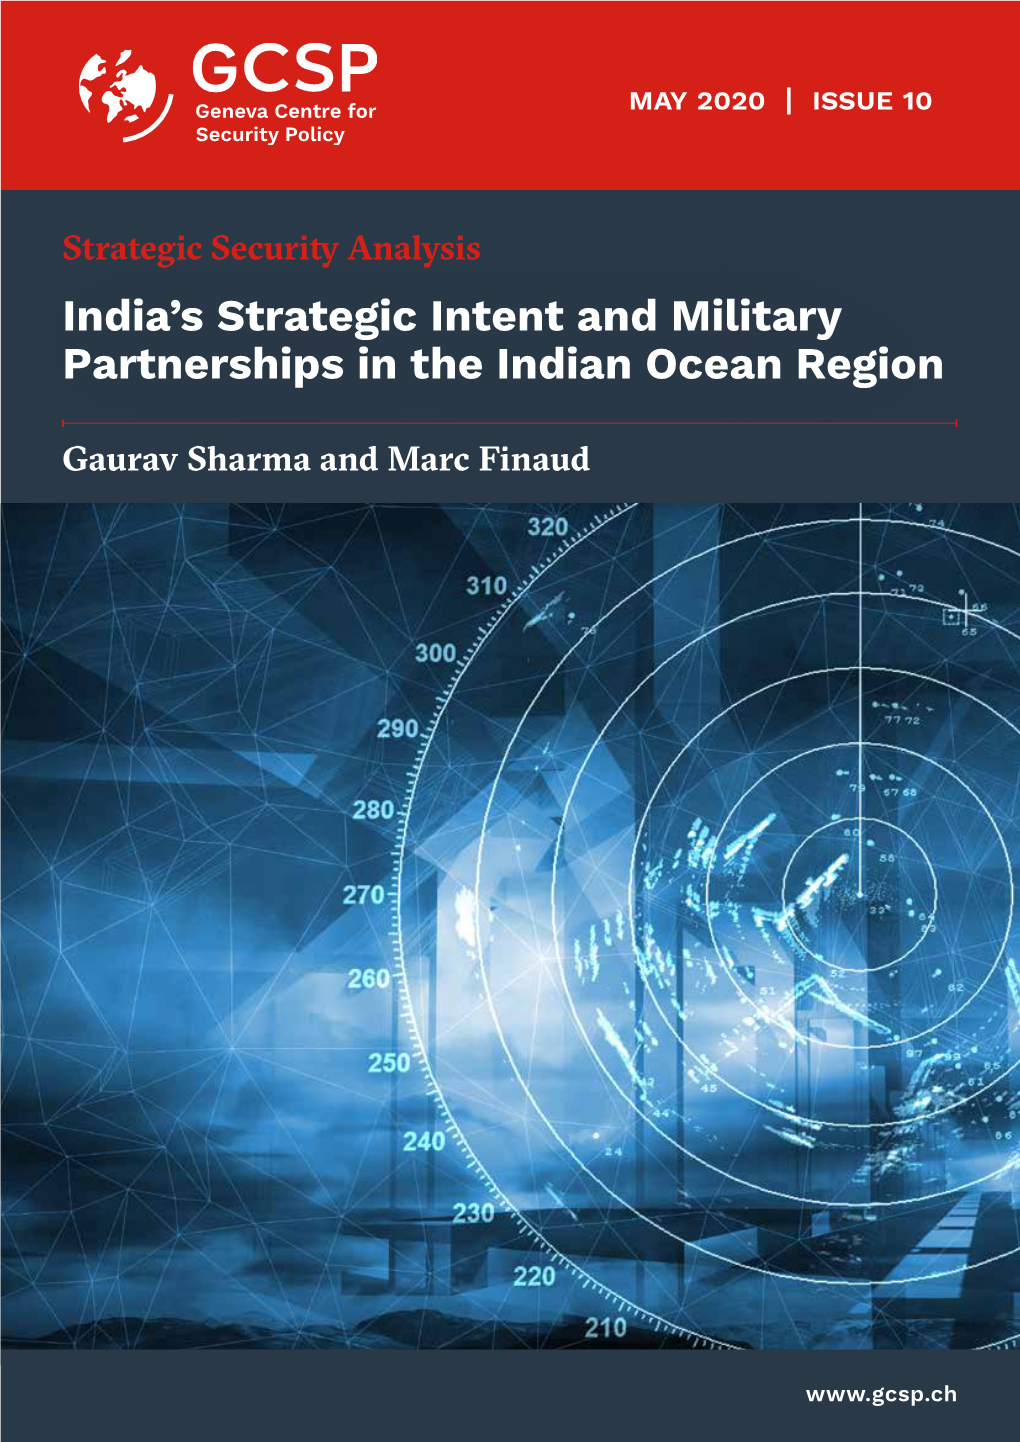 India's Strategic Intent and Military Partnerships in the Indian Ocean